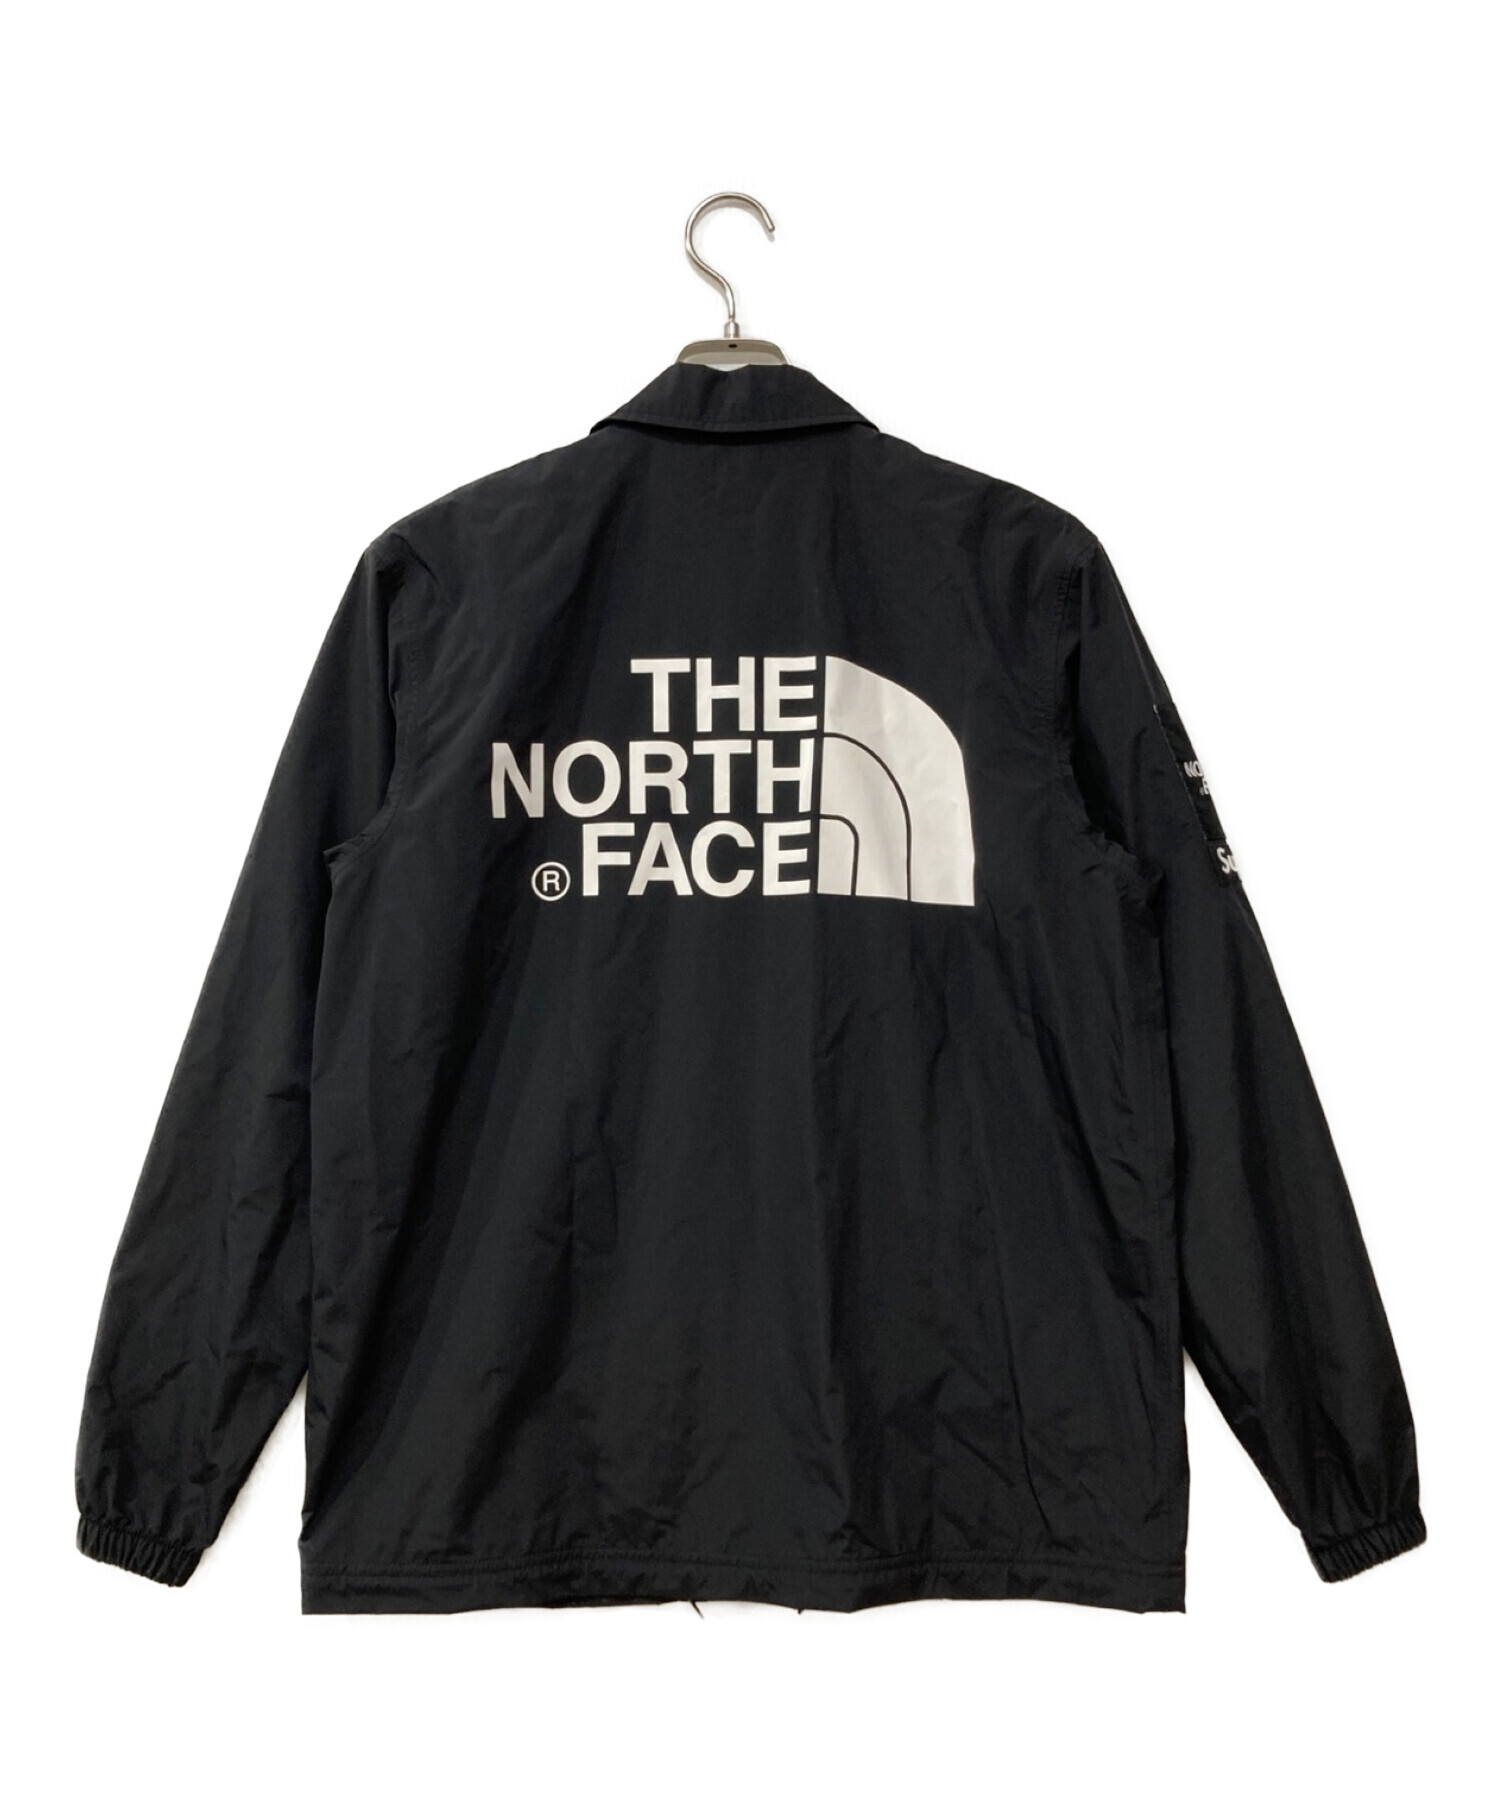 SUPREME×THE NORTH FACE (シュプリーム × ザノースフェイス) 15SS Packable Coaches Jacket  ブラック サイズ:S